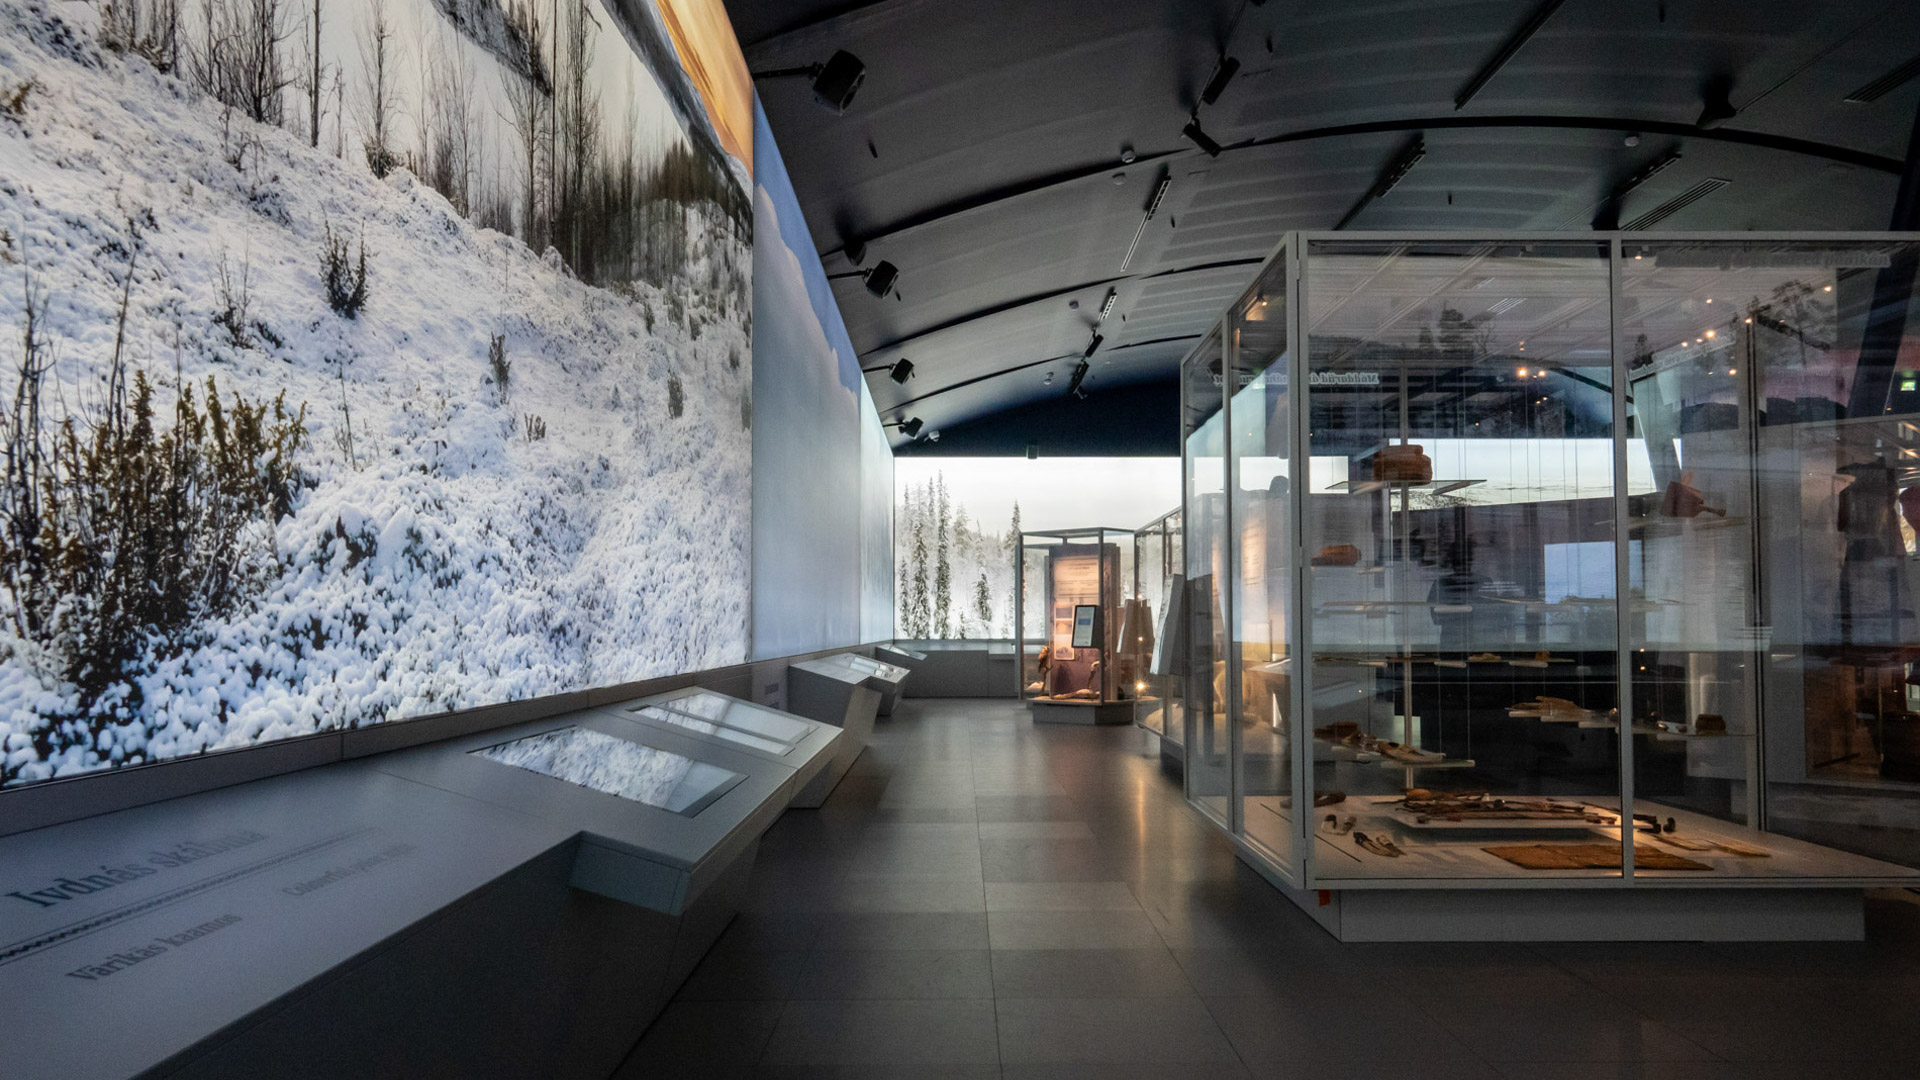 Sámi Museum Siida uses modern video and audio solutions to introduce all guests to the exciting world of the Sámi people, their traditions and the land where they live.